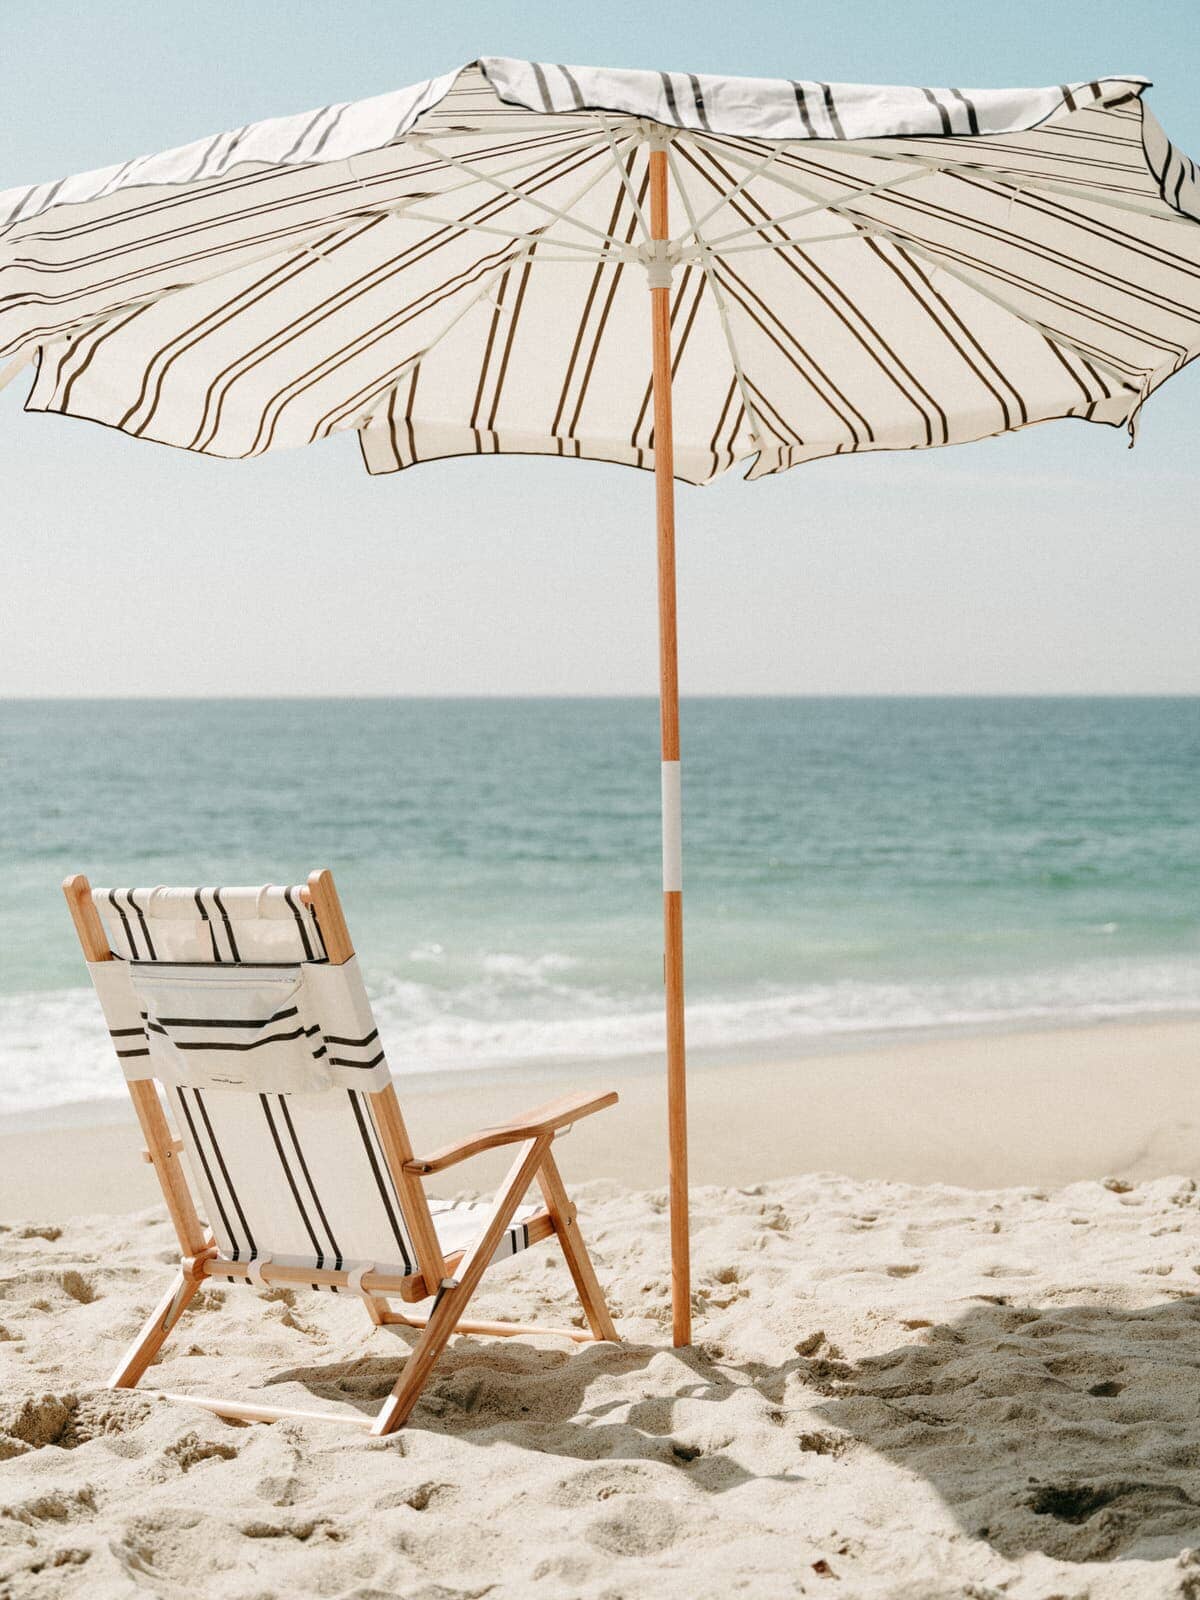 Black two stripe tommy chair on the beach with amalfi umbrella